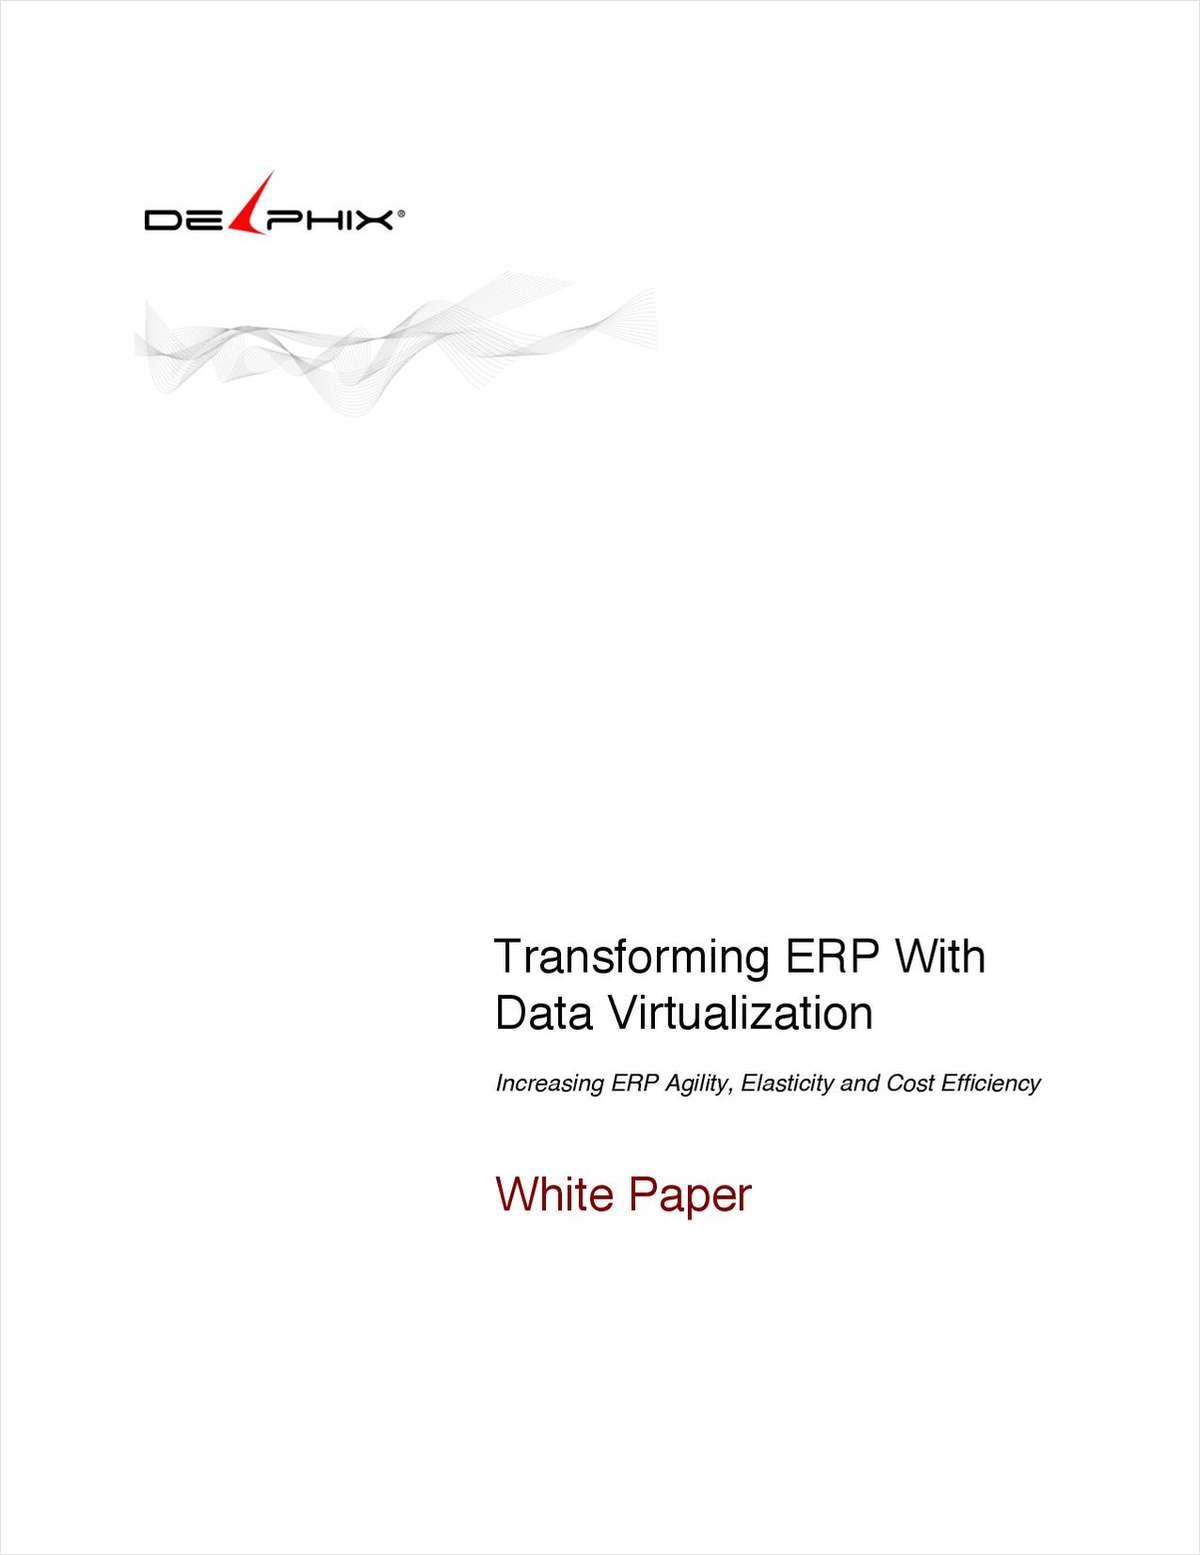 Transforming ERP with Data Virtualization